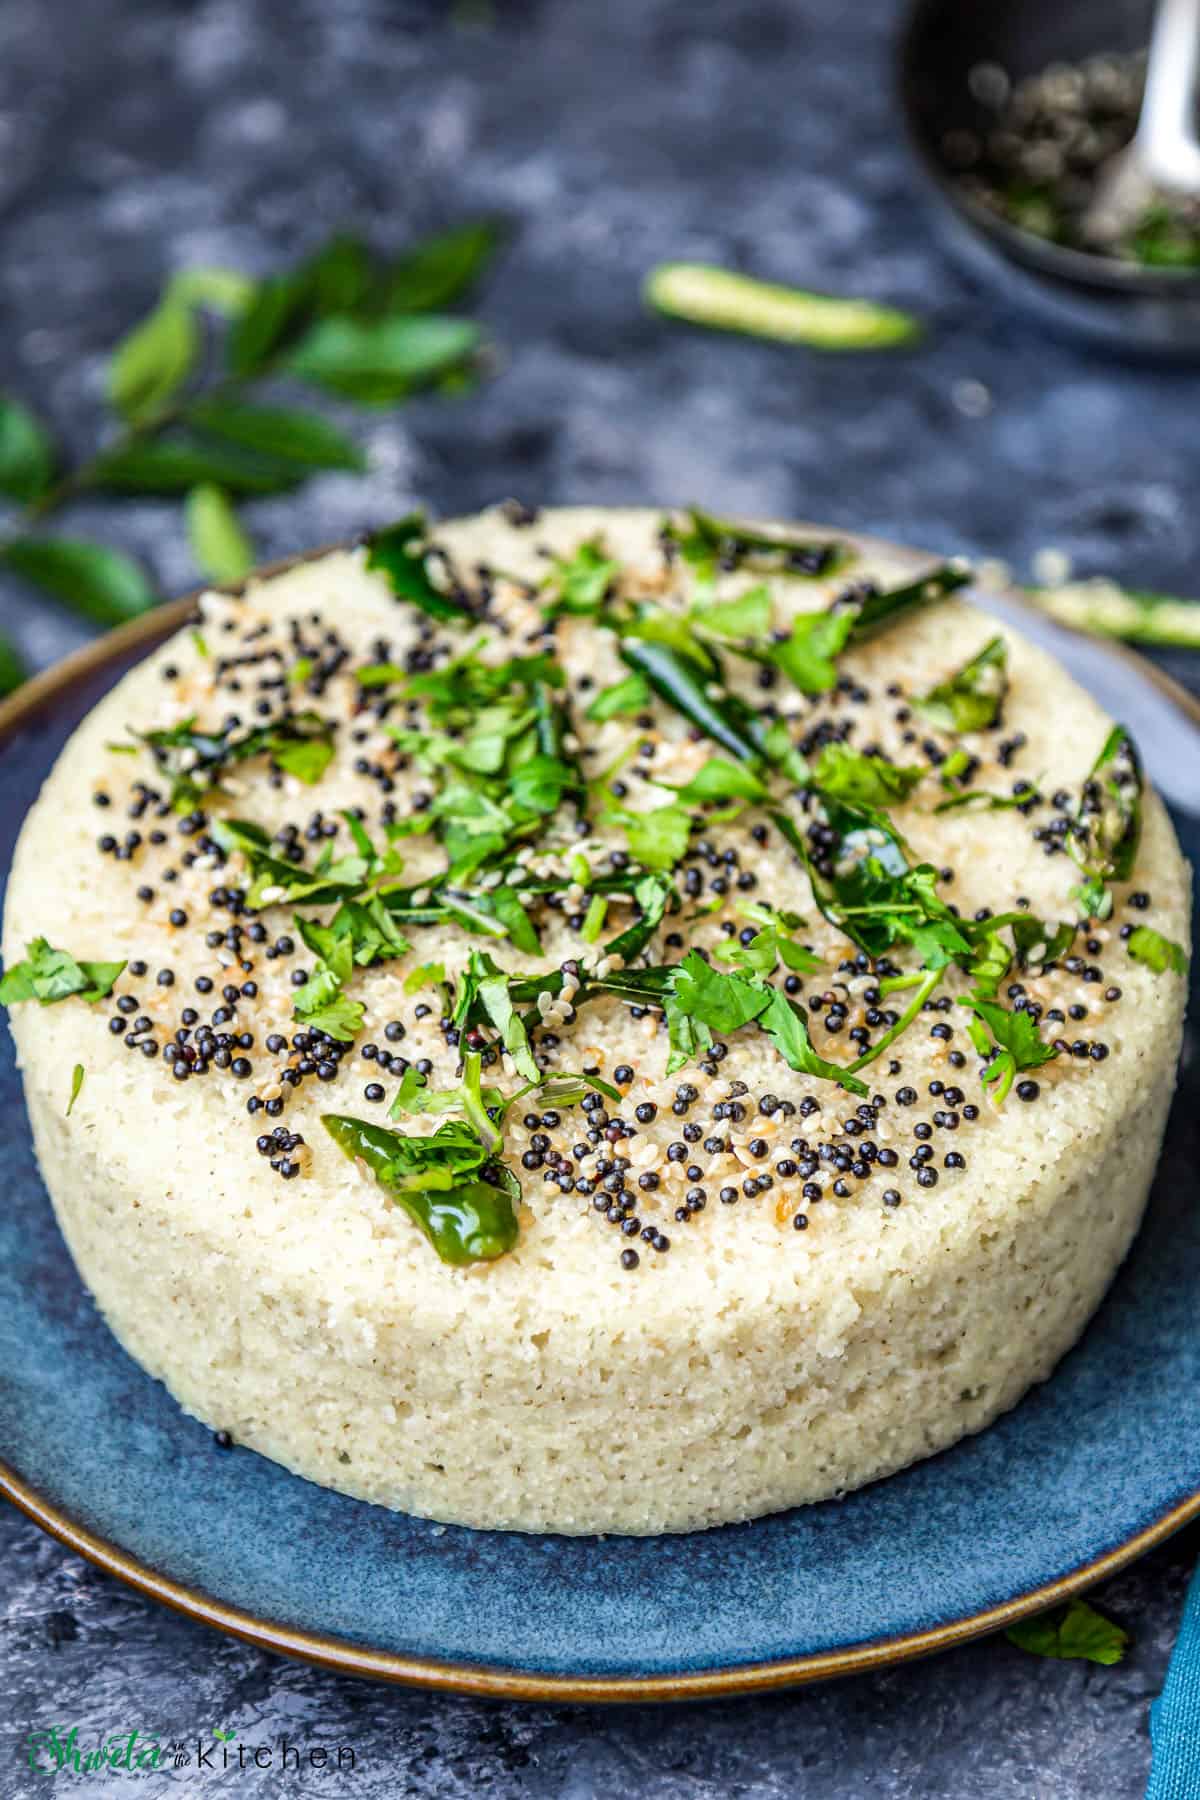 Round Rava dhokla with tempering placed on blue plate